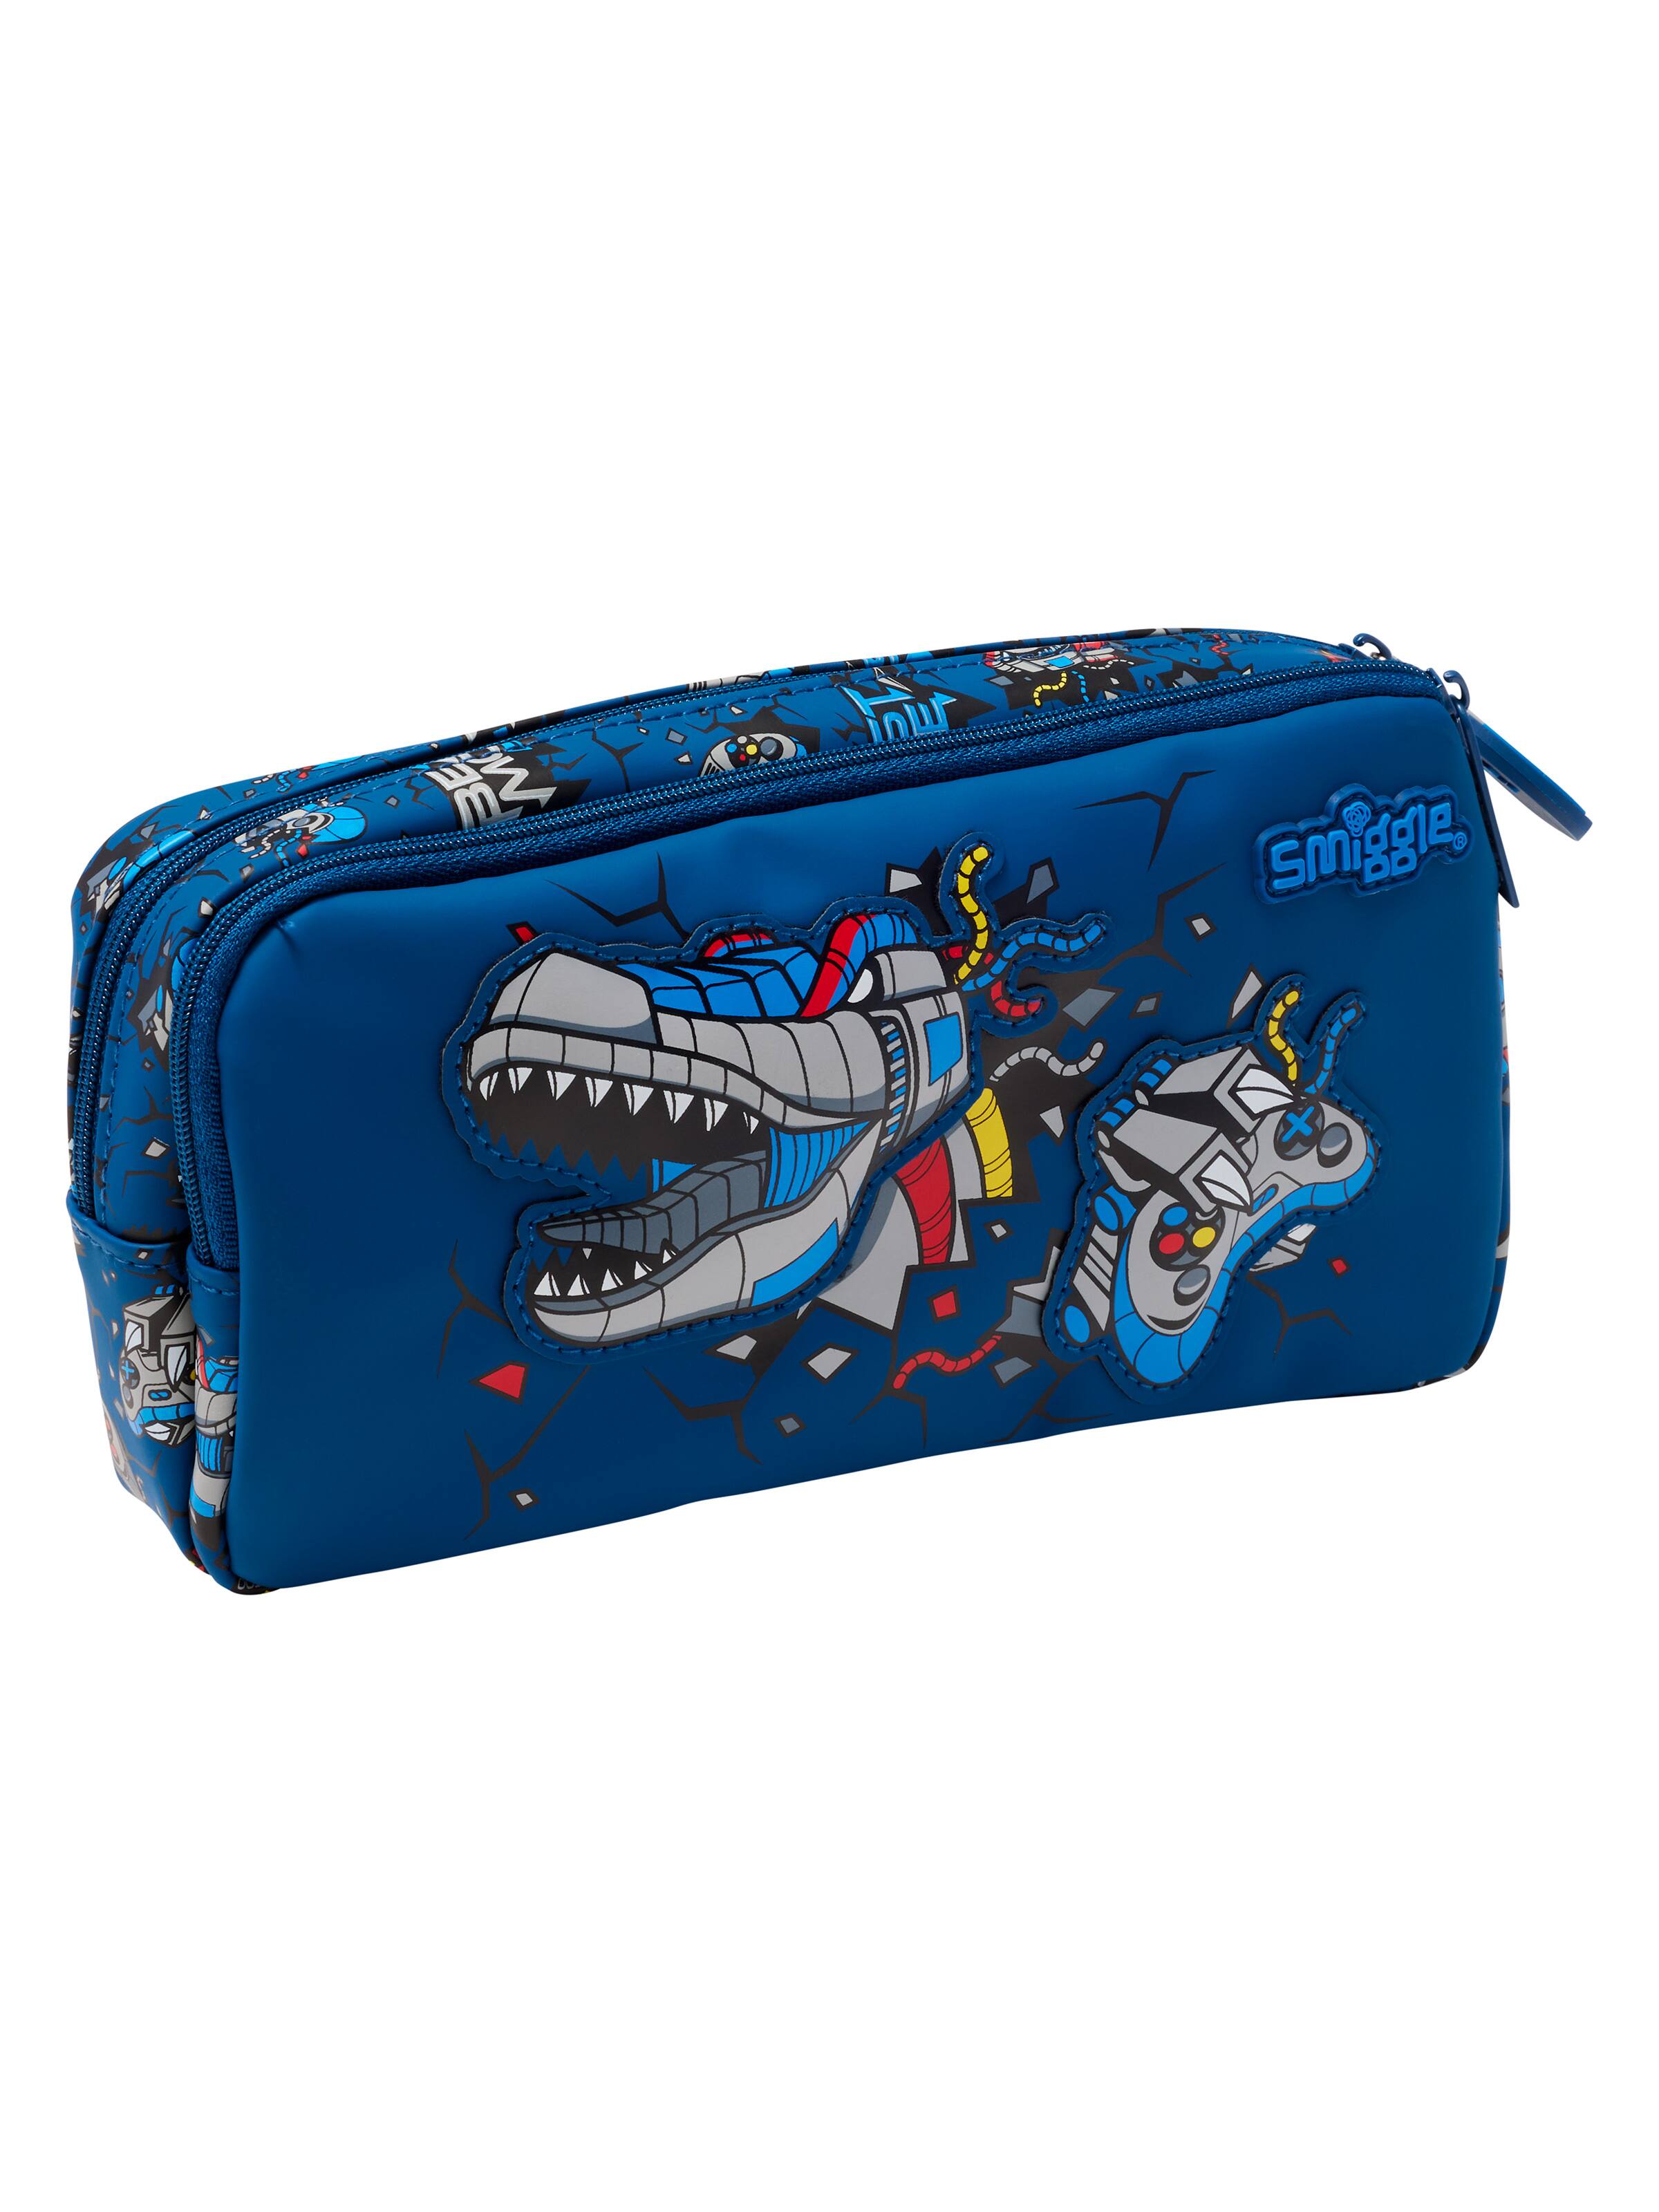 Fly High Character Pocket Pencil Case